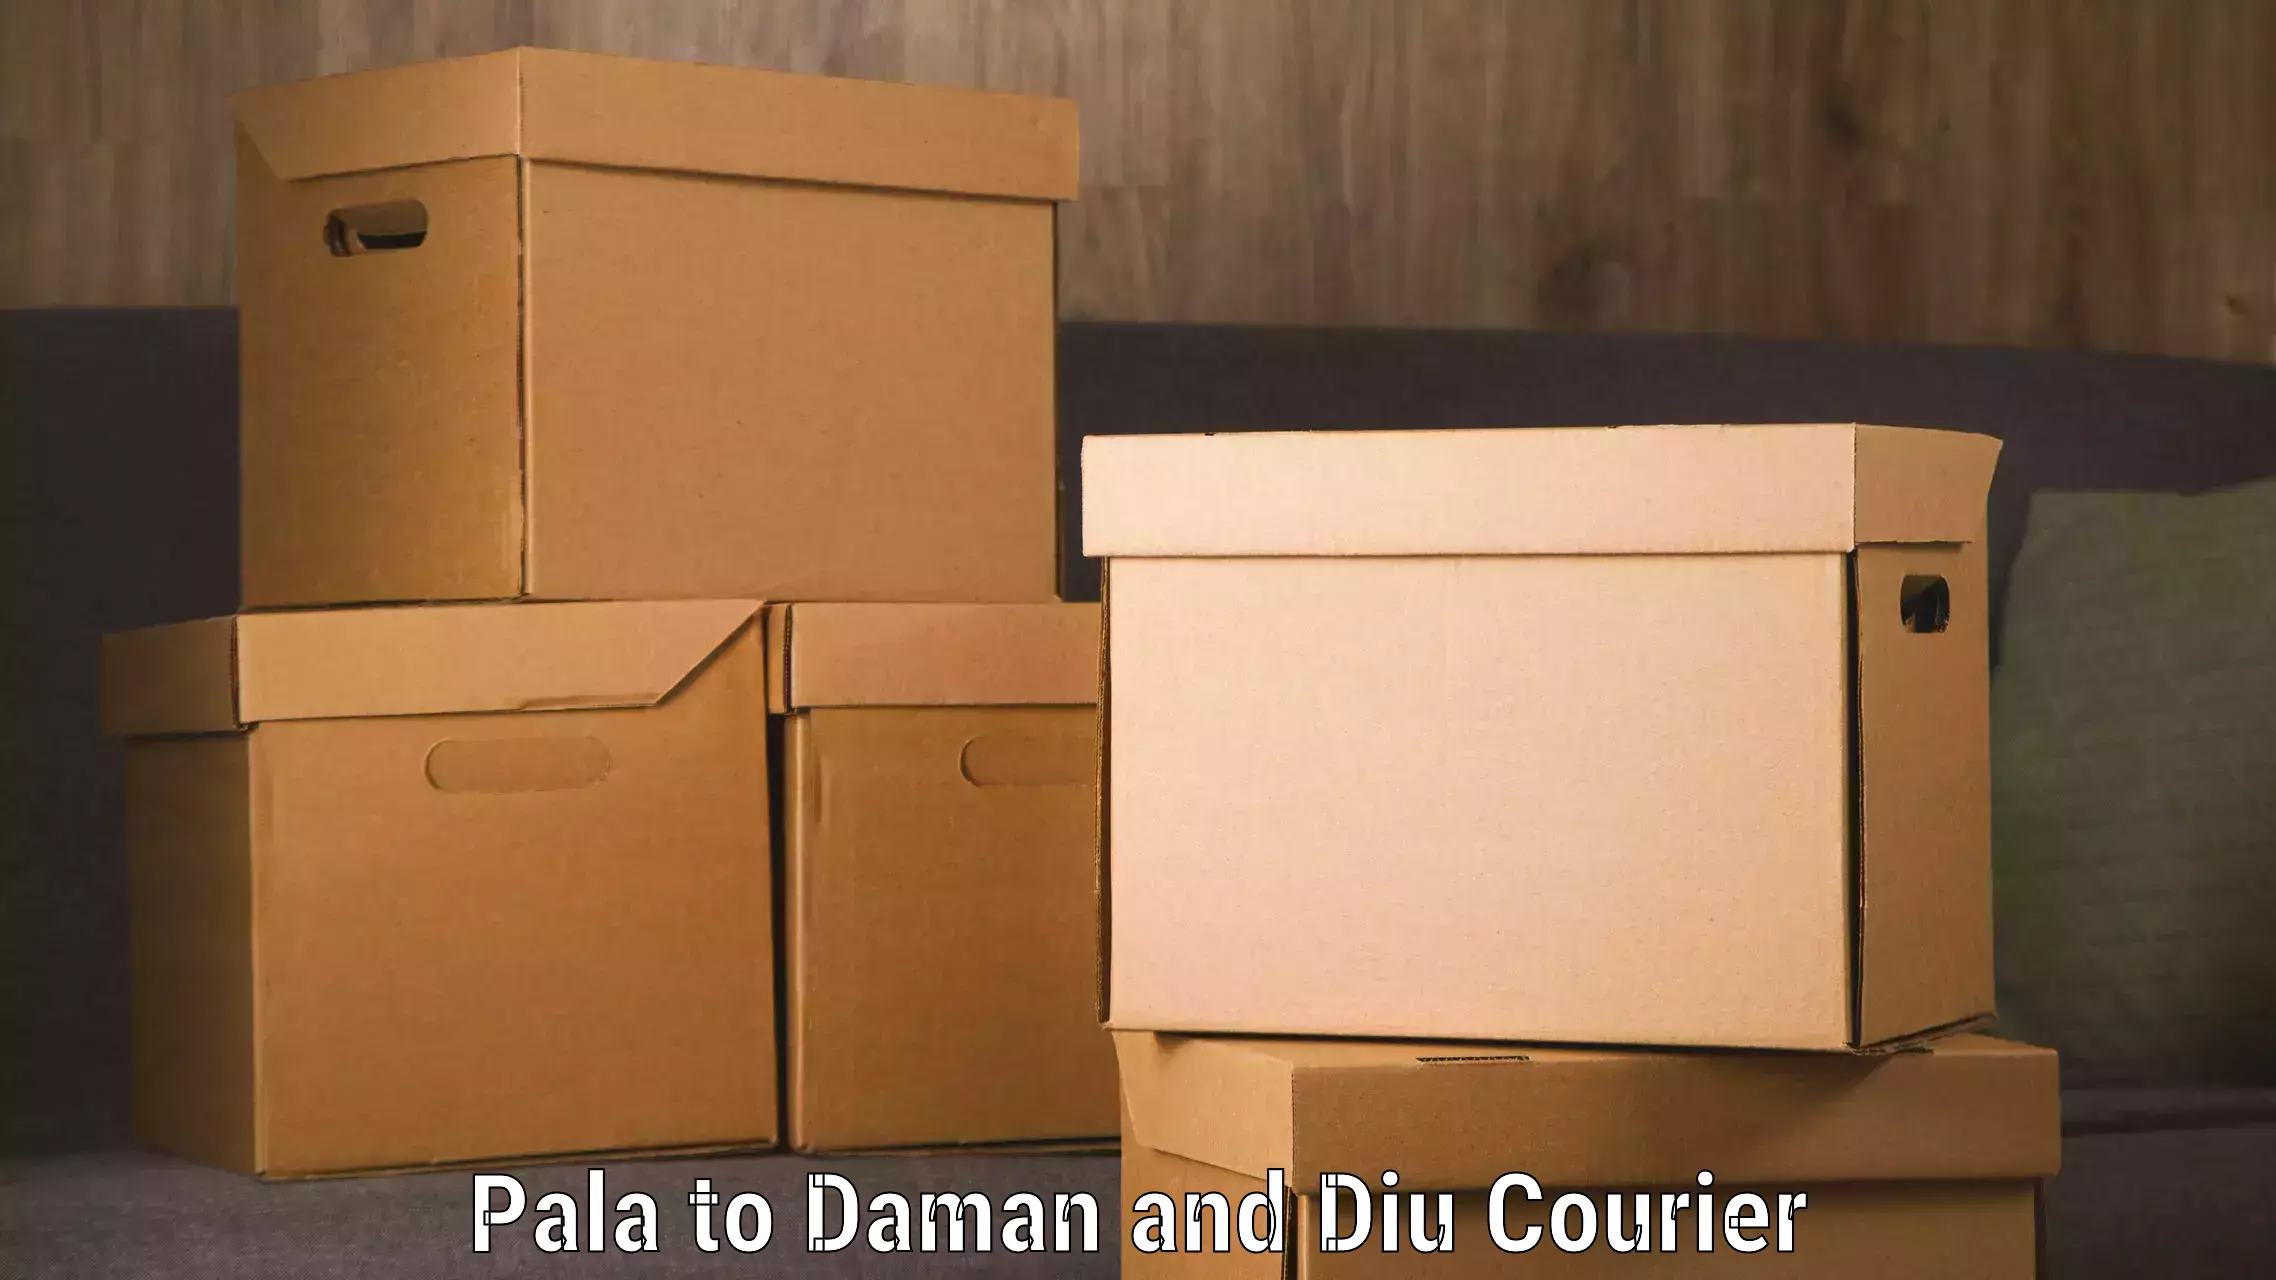 Subscription-based courier Pala to Daman